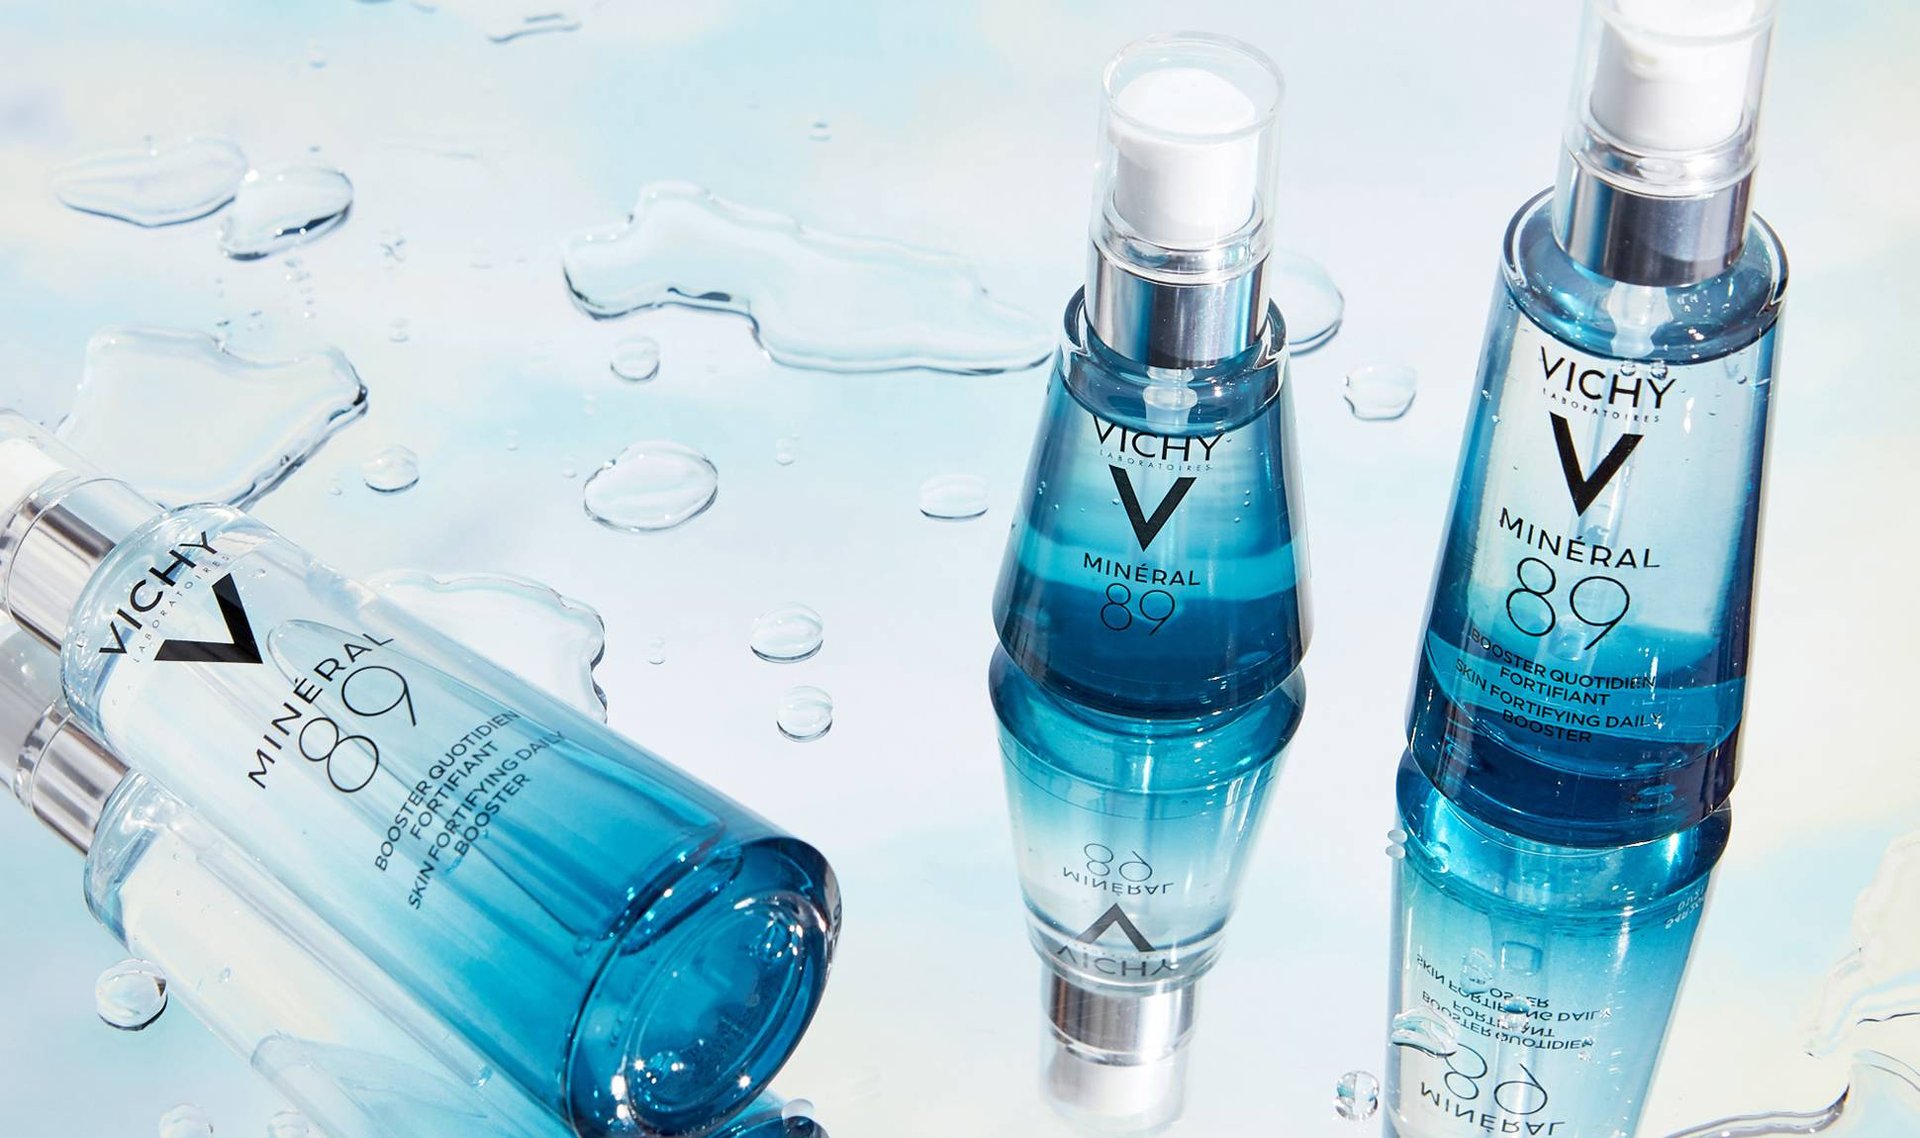 We’re Giving Away 50,000 Free Samples of Vichy Minéral 89 Hyaluronic Acid Face Moisturizer